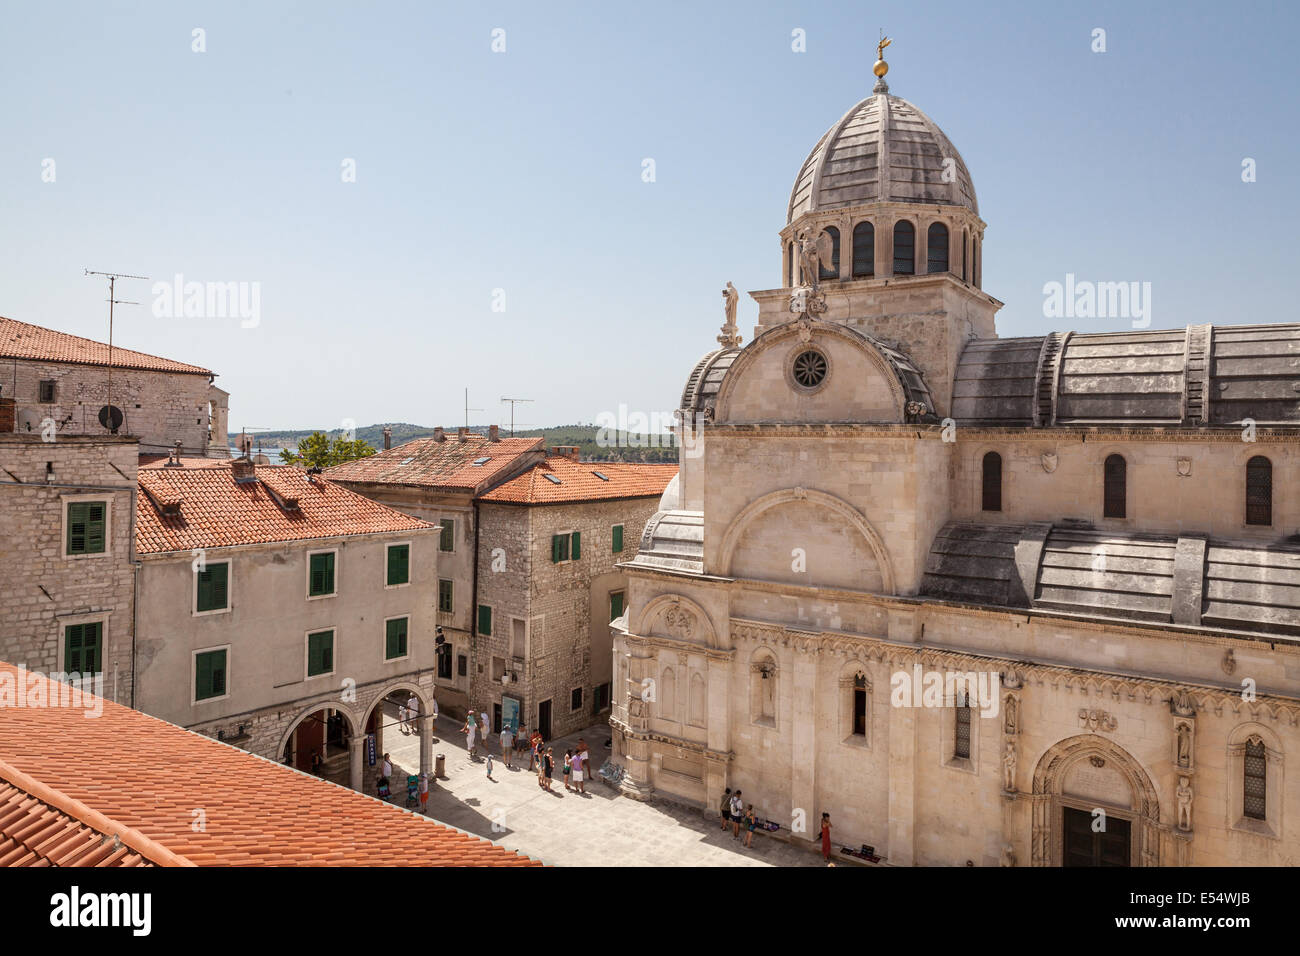 Cathedral of St. James in historic center of Sibenik, Croatia, with nearby buildings and tourists strolling around. Stock Photo